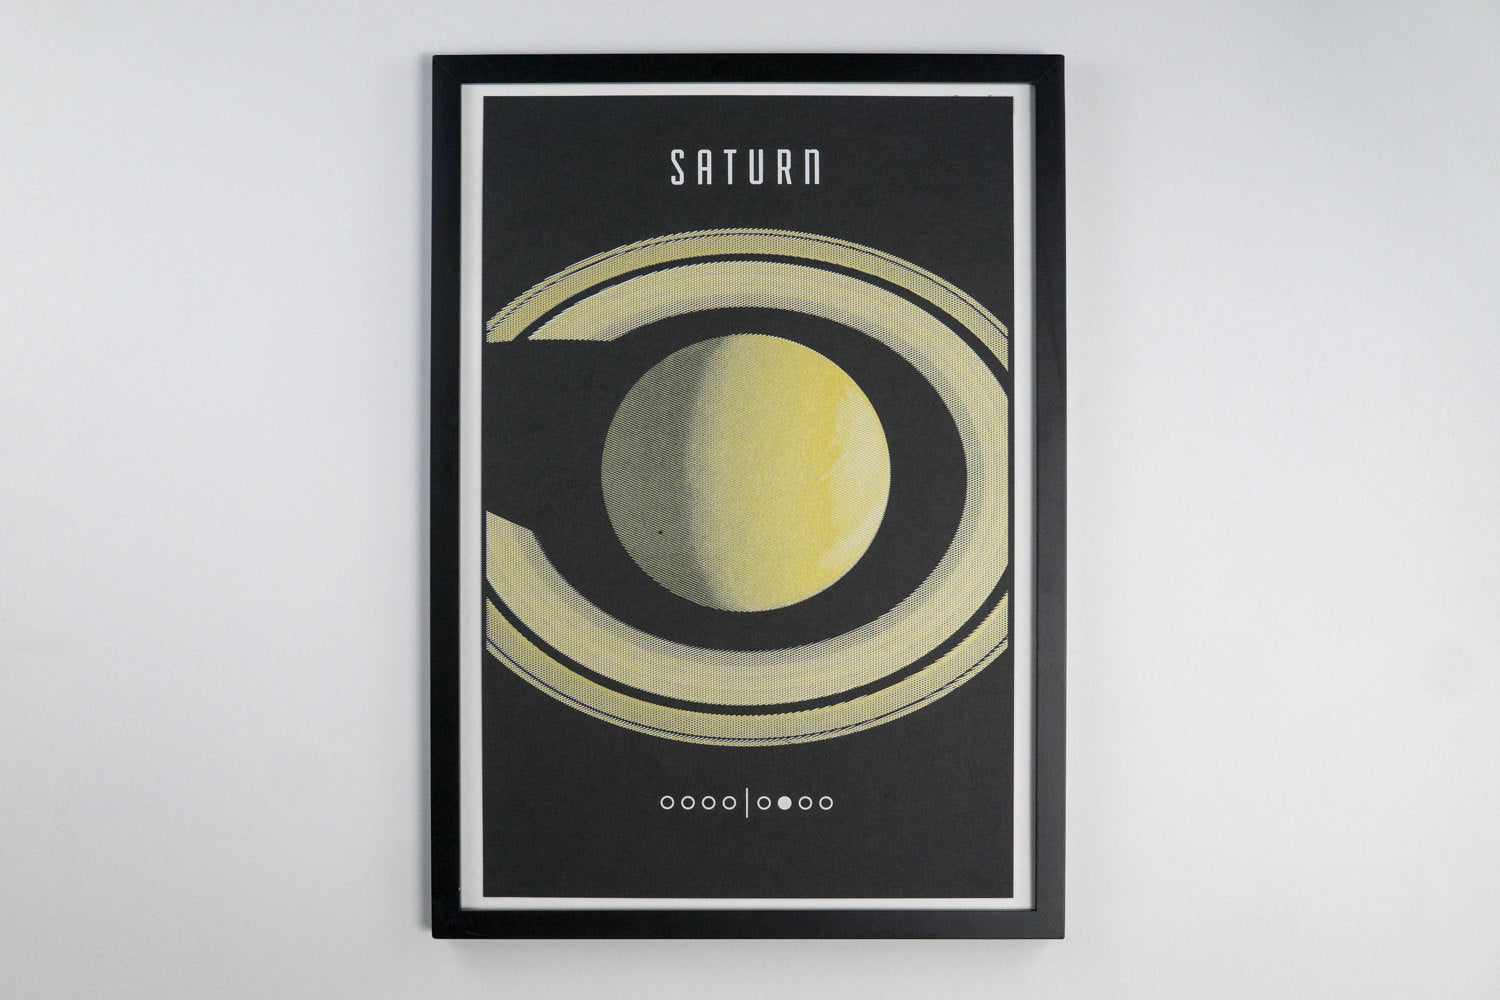 Planet Saturn Poster